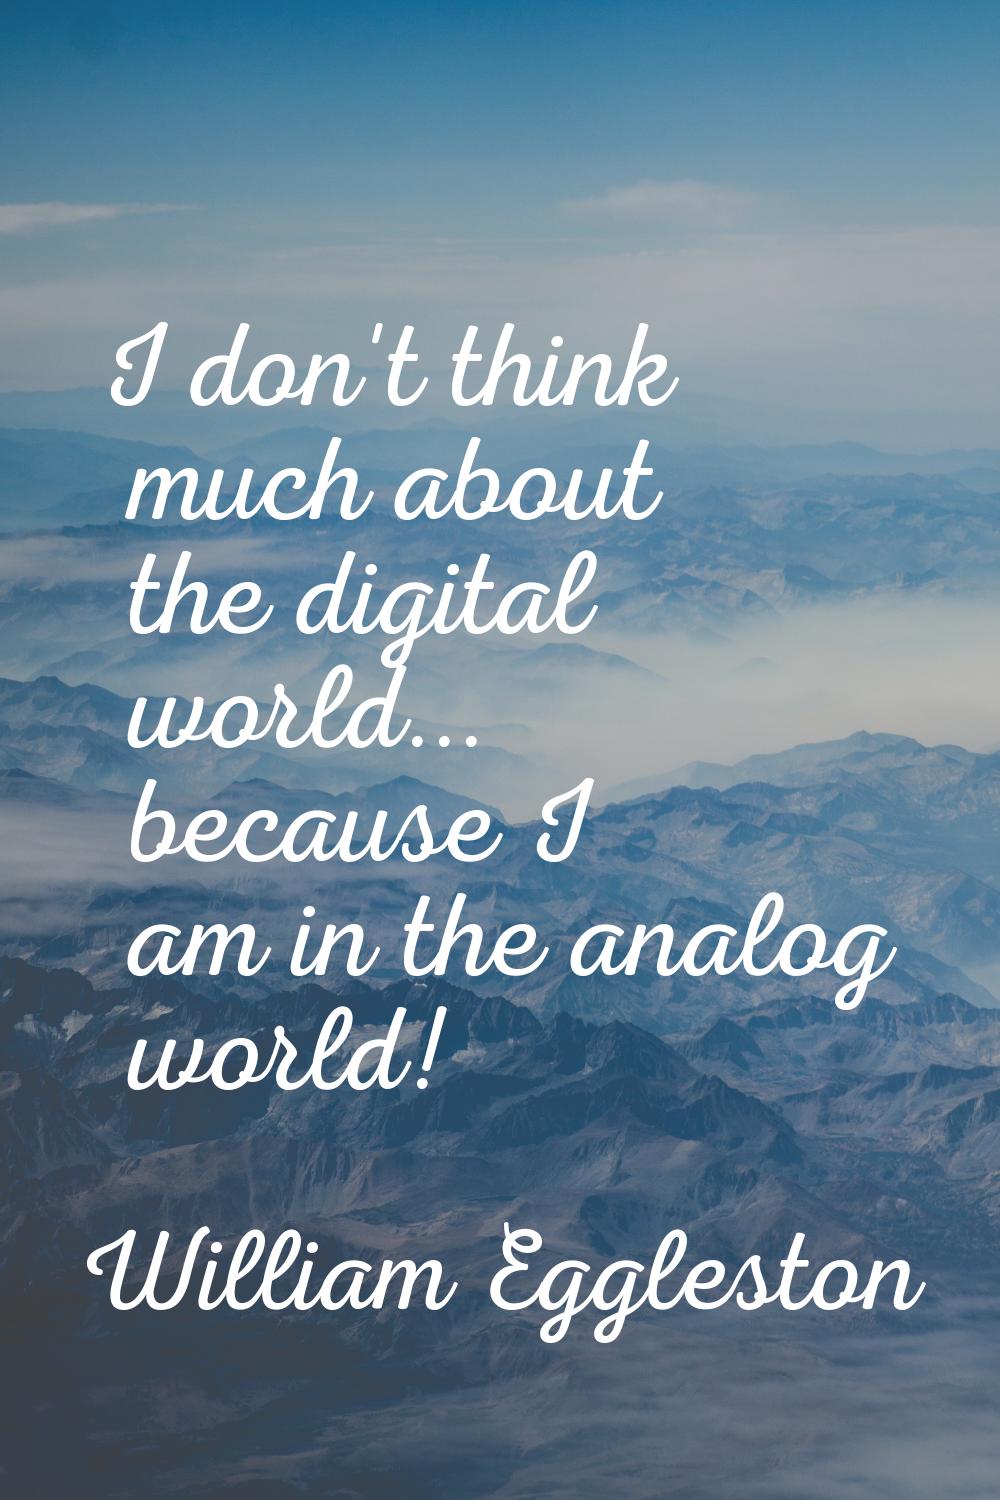 I don't think much about the digital world... because I am in the analog world!